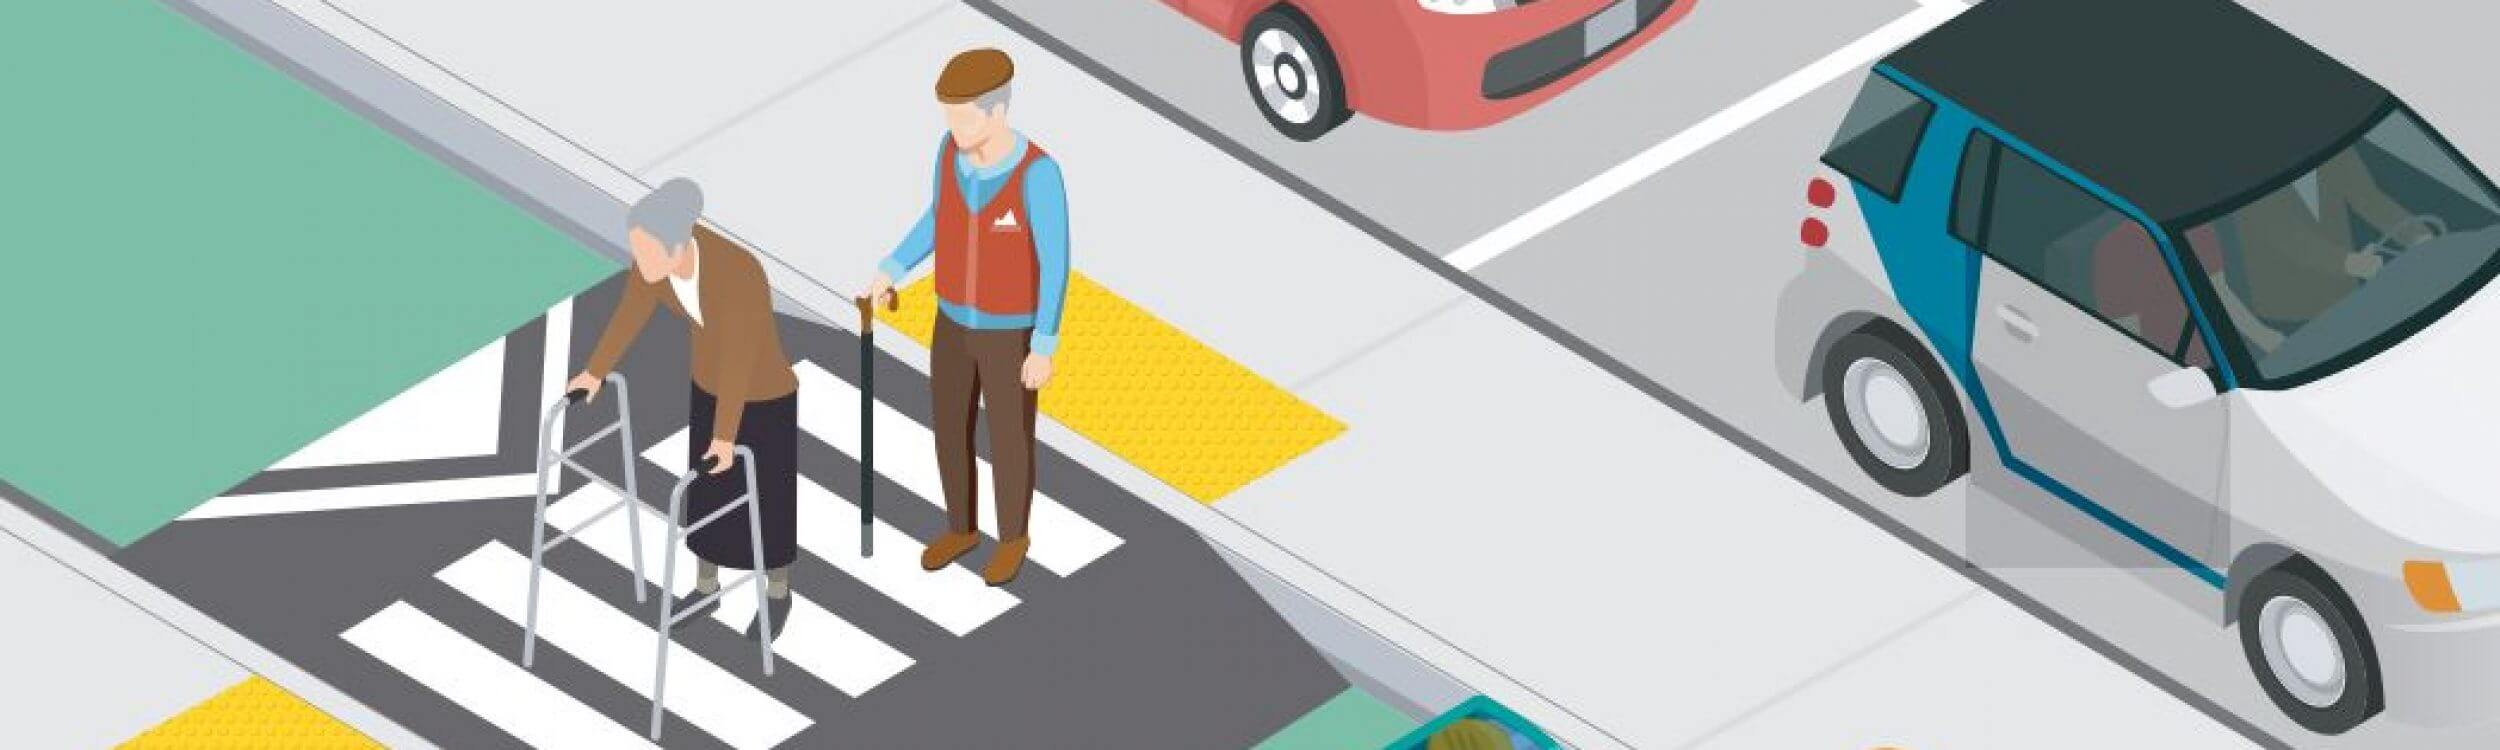 New report on how to design protected bike lanes that keep pedestrians safe